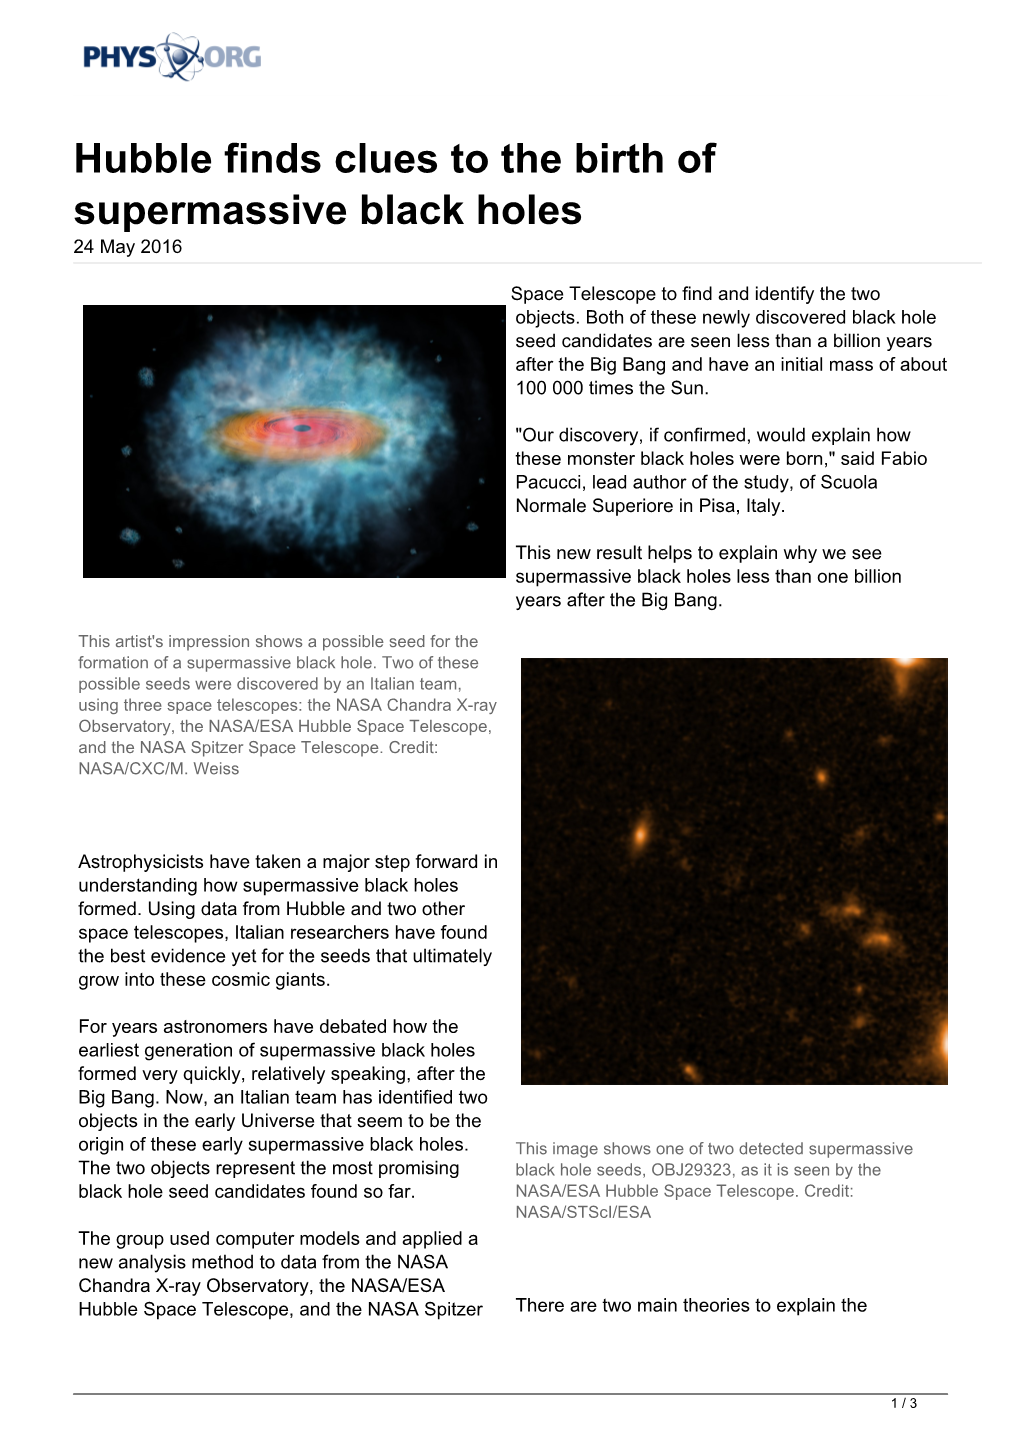 Hubble Finds Clues to the Birth of Supermassive Black Holes 24 May 2016